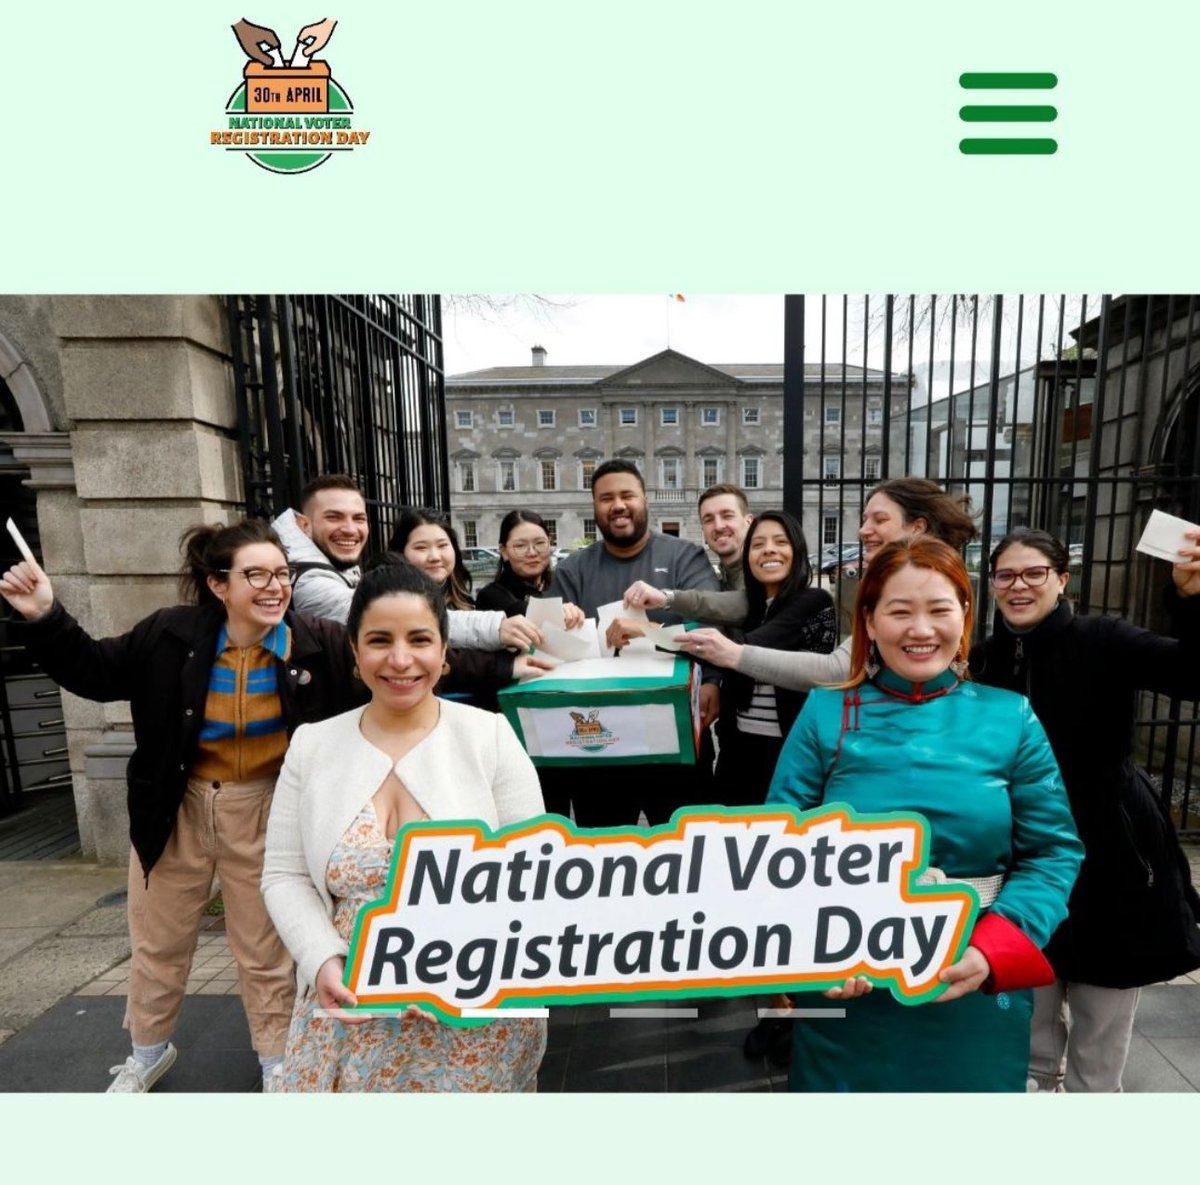 Partnering with @Black_andirish & @ICOSirl 
today at the @MansionHouseDub to ensure all voices are heard in the upcoming elections.

There is huge awareness raising for minority groups in the #NationalVoterRegistrationDay

This is important to our mission of #EqualityForAll.